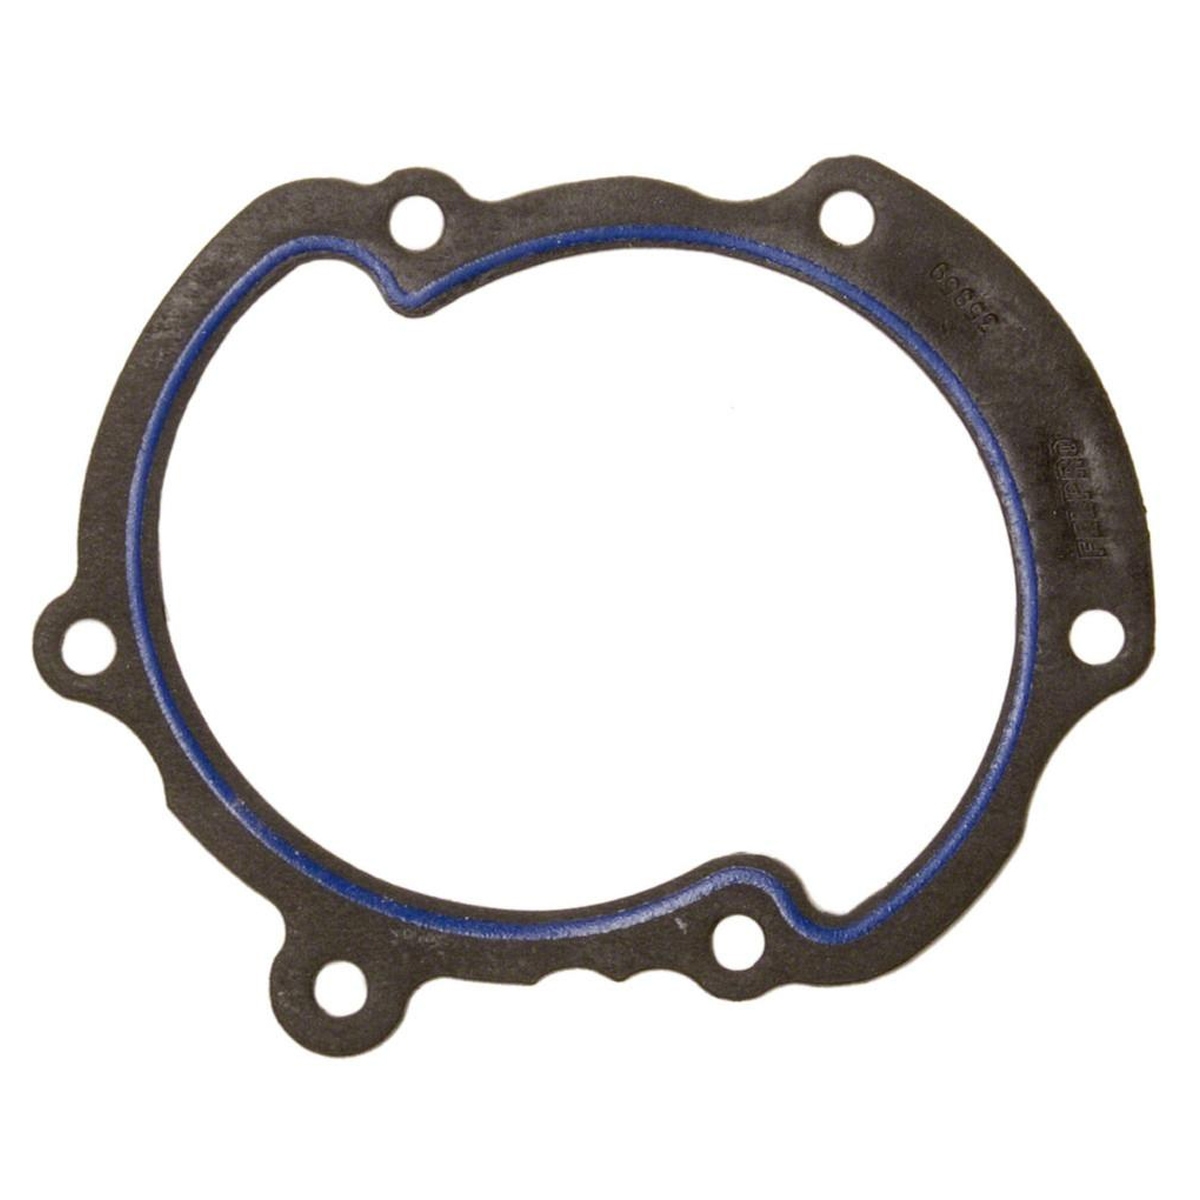 VAUXHALL AND OPEL MOVANO Water Pump Gasket